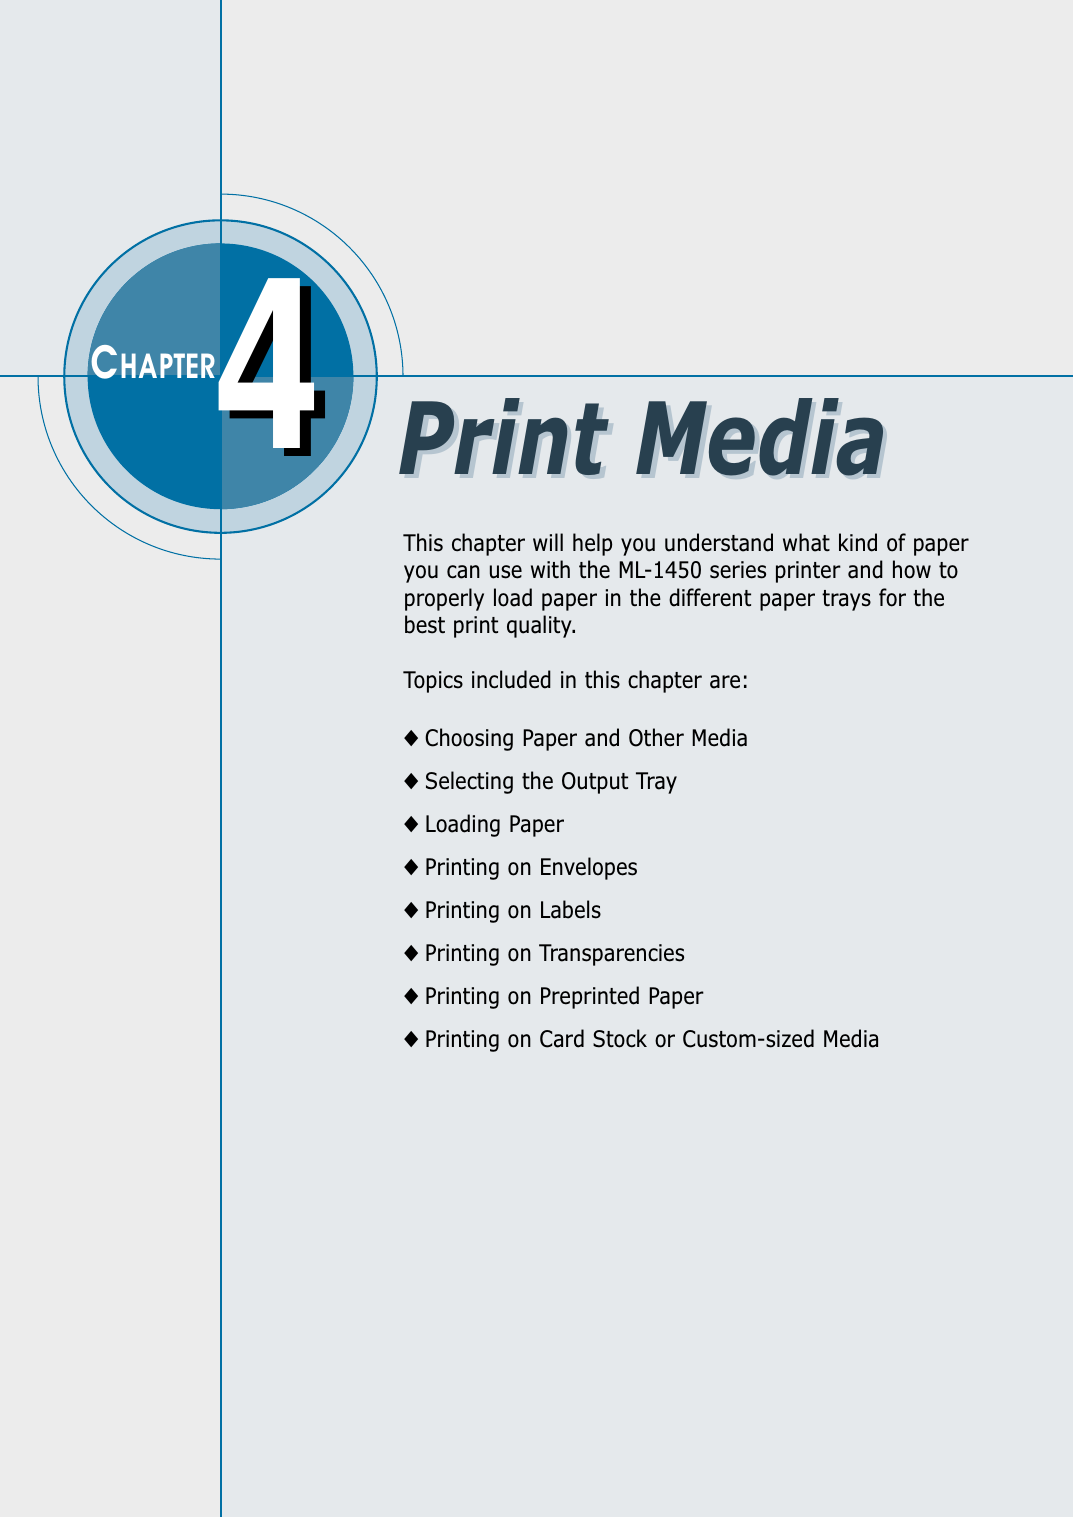 This chapter will help you understand what kind of paperyou can use with the ML-1450 series printer and how toproperly load paper in the different paper trays for thebest print quality.Topics included in this chapter are:◆ Choosing Paper and Other Media◆ Selecting the Output Tray◆ Loading Paper◆ Printing on Envelopes◆ Printing on Labels◆ Printing on Transparencies◆ Printing on Preprinted Paper◆ Printing on Card Stock or Custom-sized Media44CHAPTERPrint MediaPrint Media